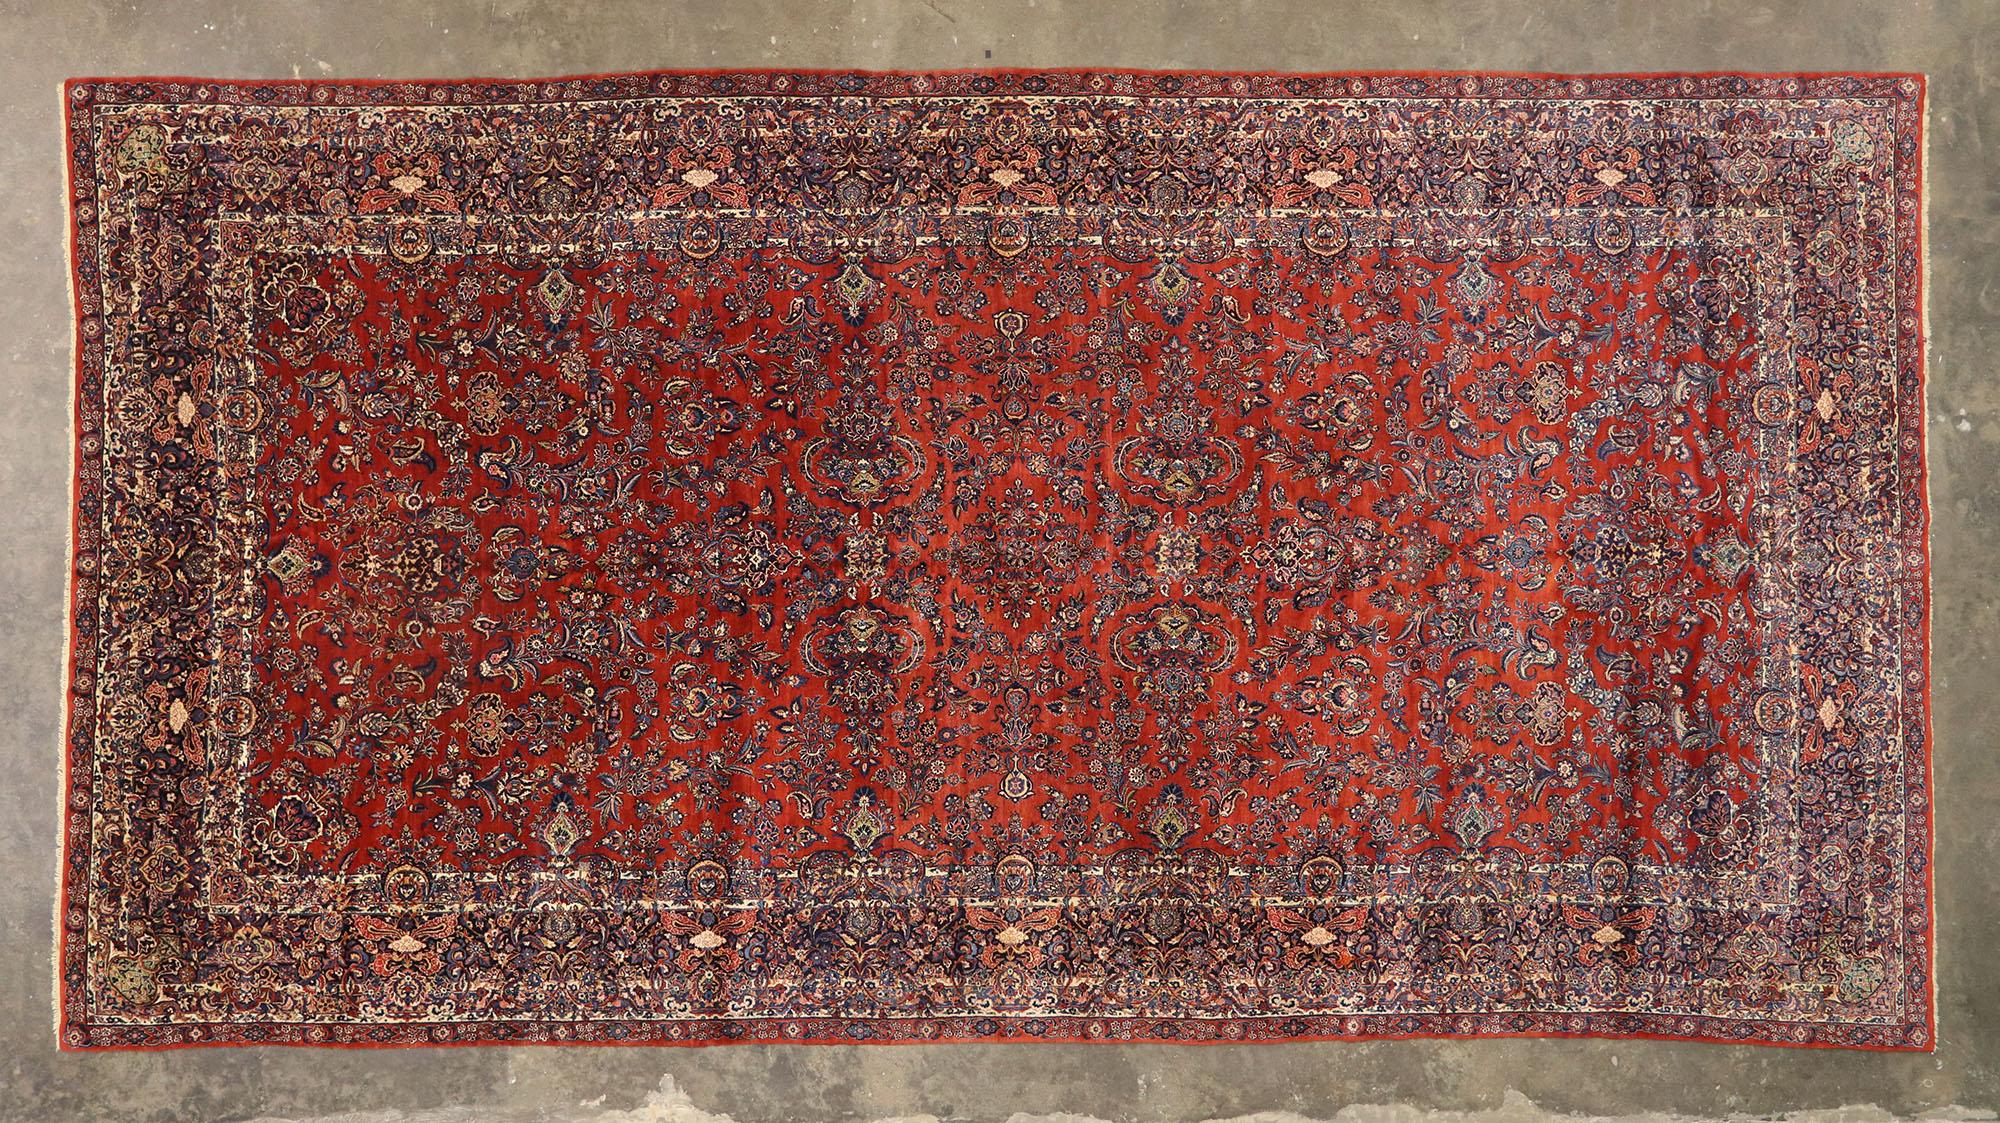 1890s Oversized Antique Persian Qazvin Rug, Hotel Lobby Size Carpet For Sale 1